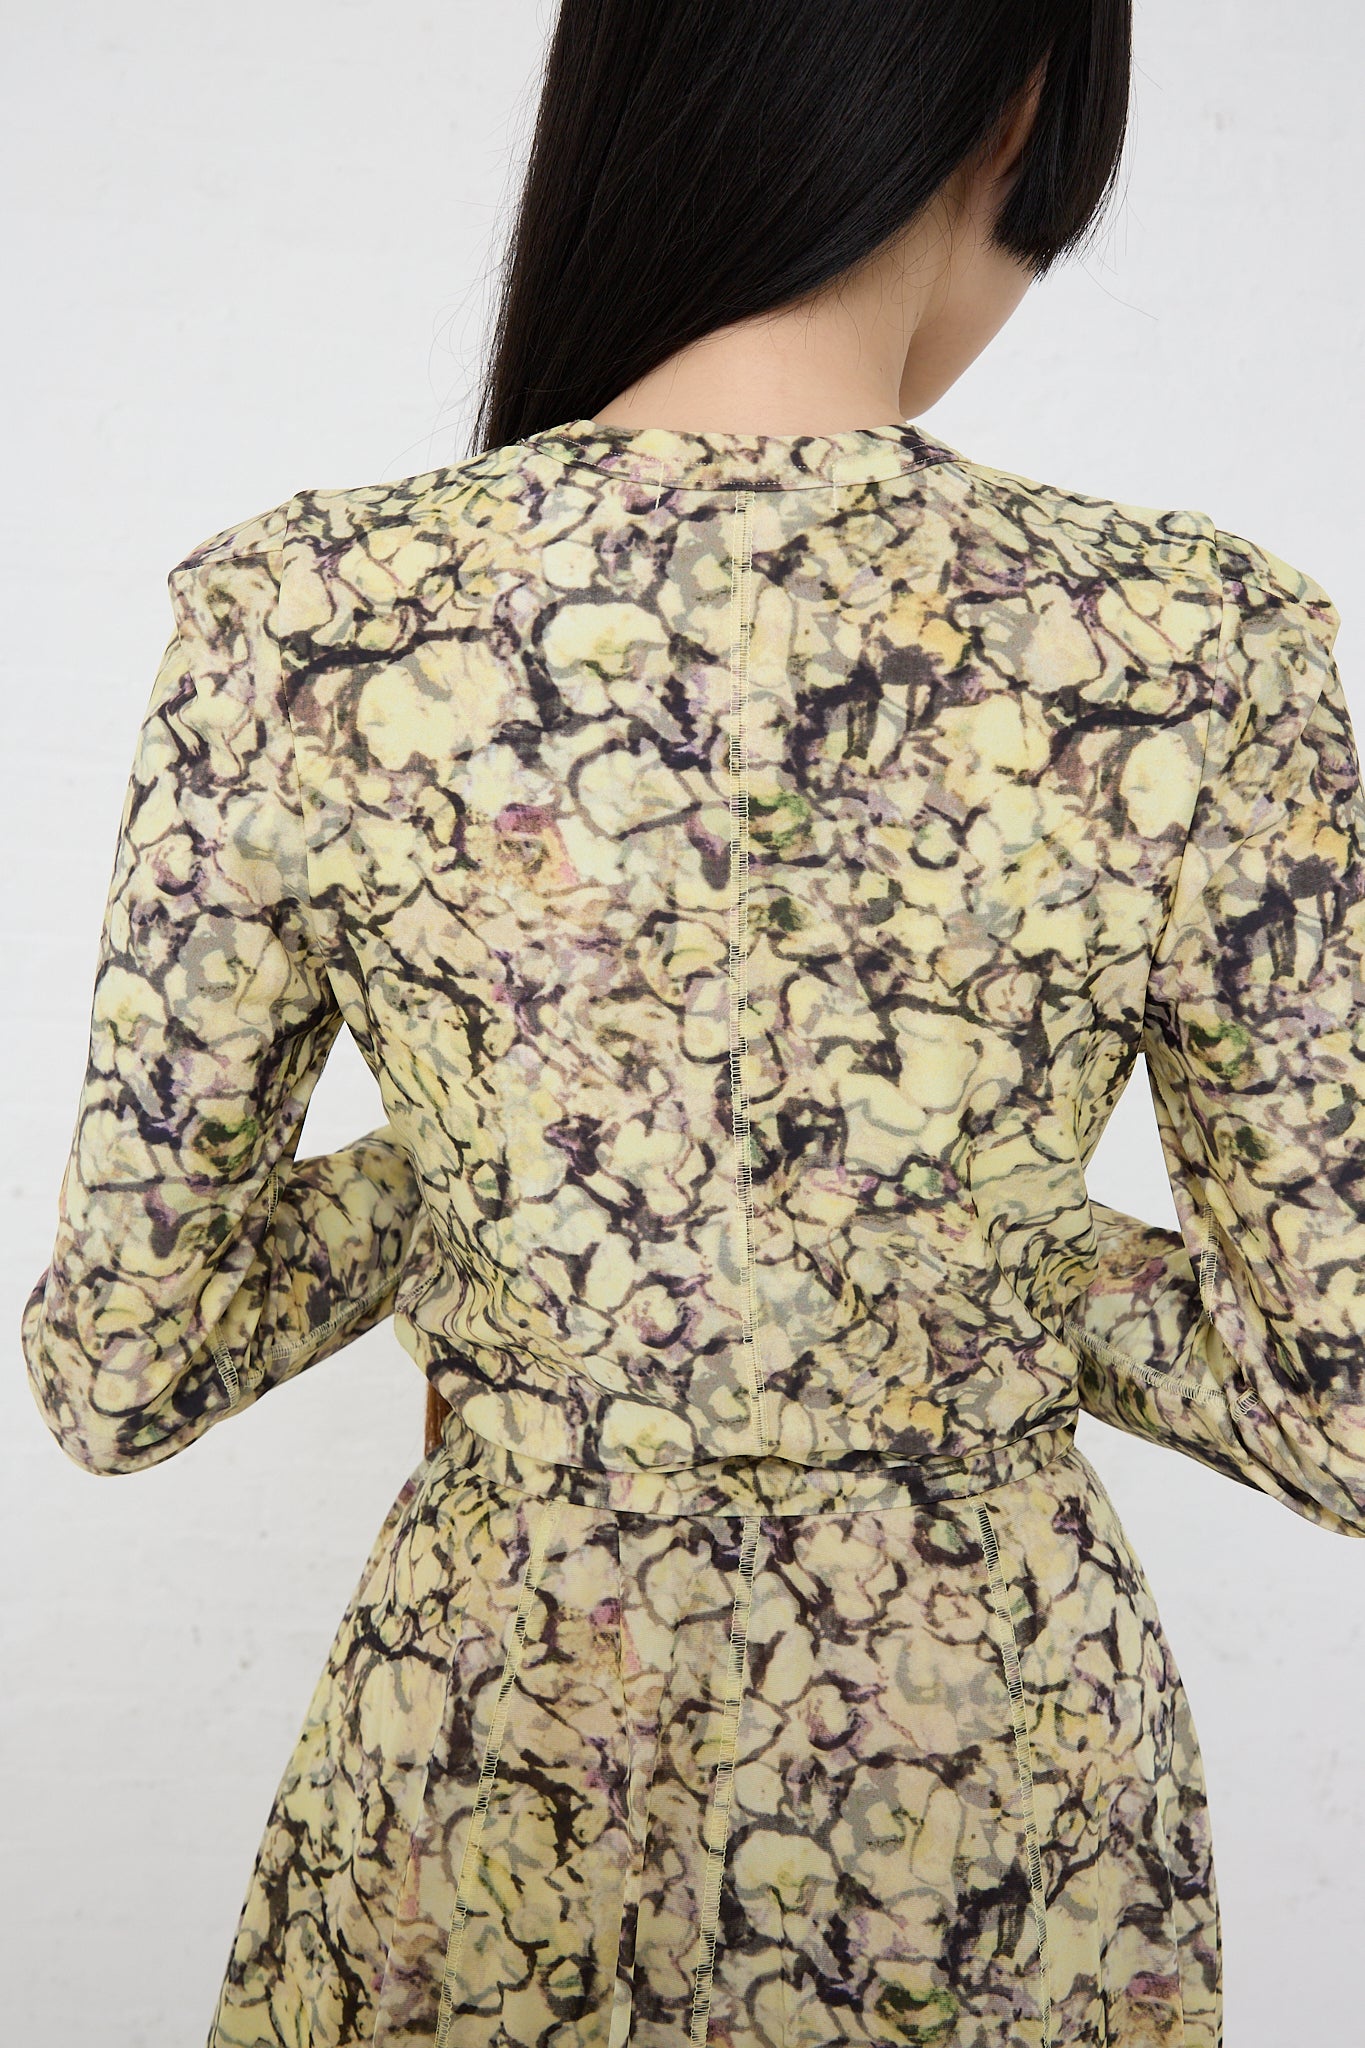 The back view of a woman wearing a TOGA PULLA Tricot Print Dress in Yellow.